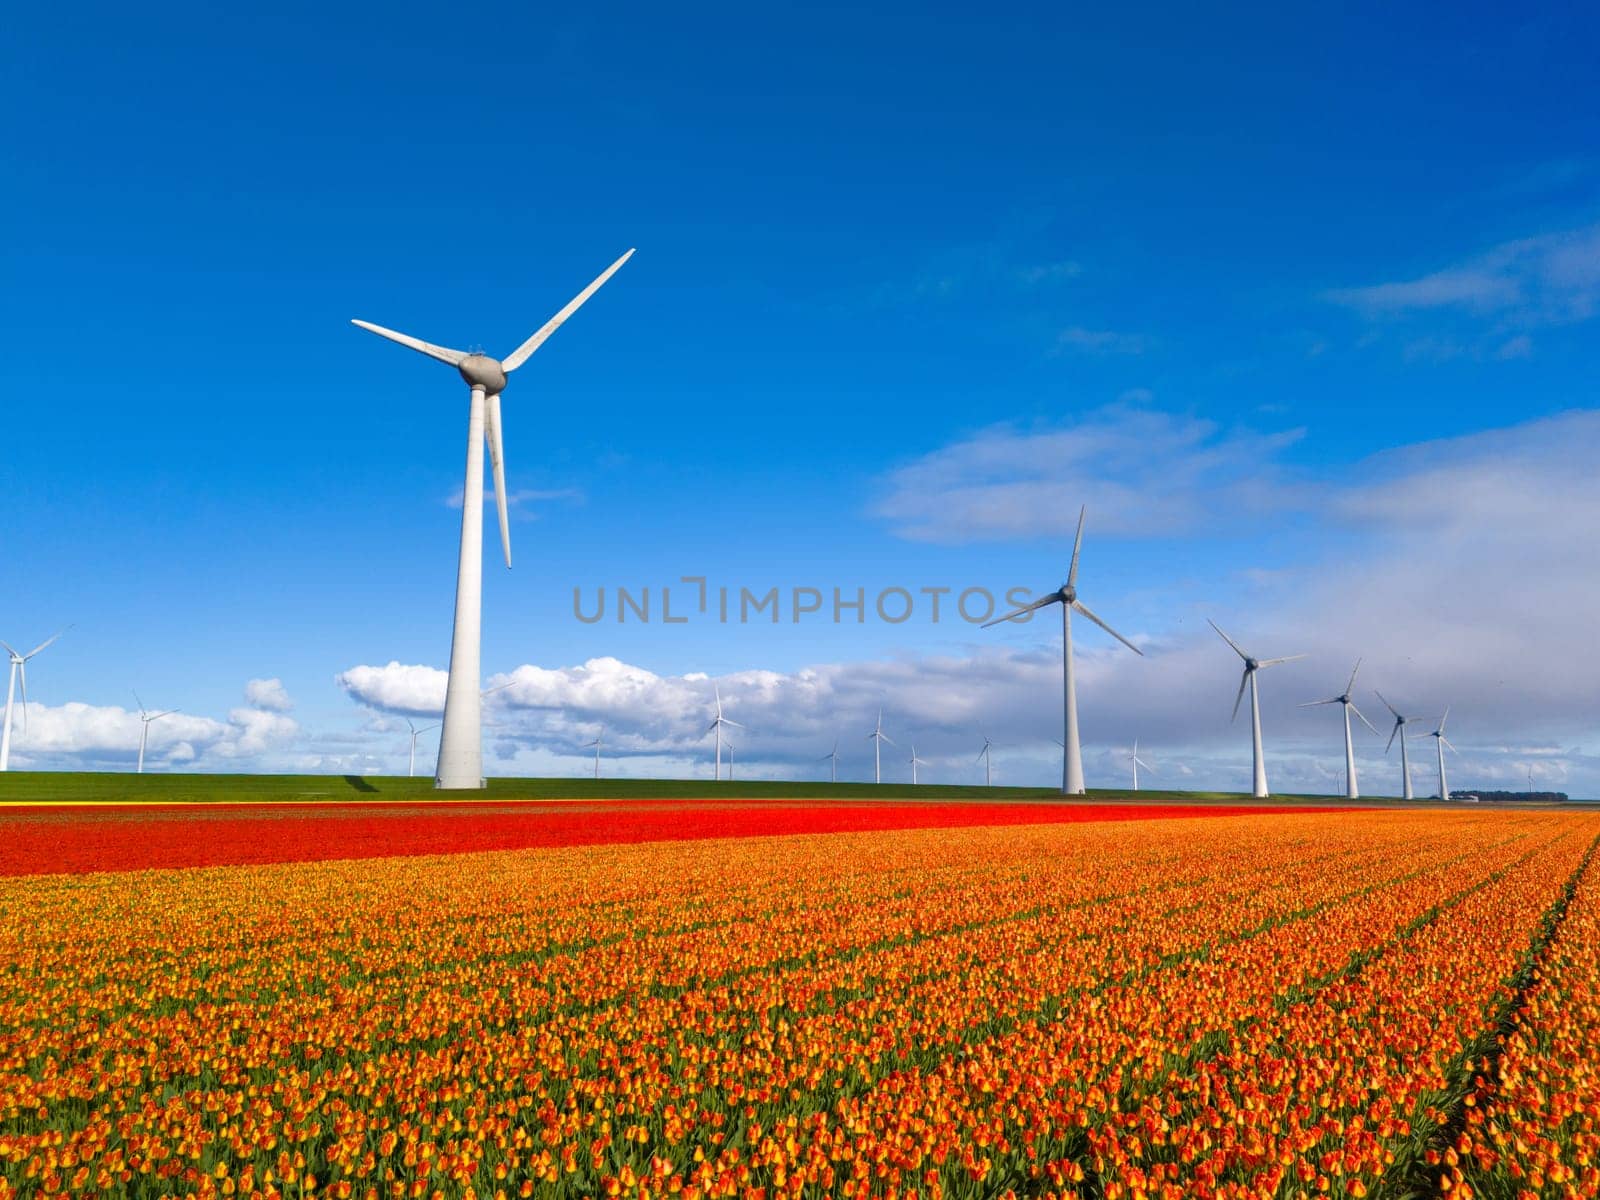 windmill park with spring flowers and a blue sky, drone aerial view with wind turbine and tulip flower field Flevoland Netherlands, zero emissions carbon neutral